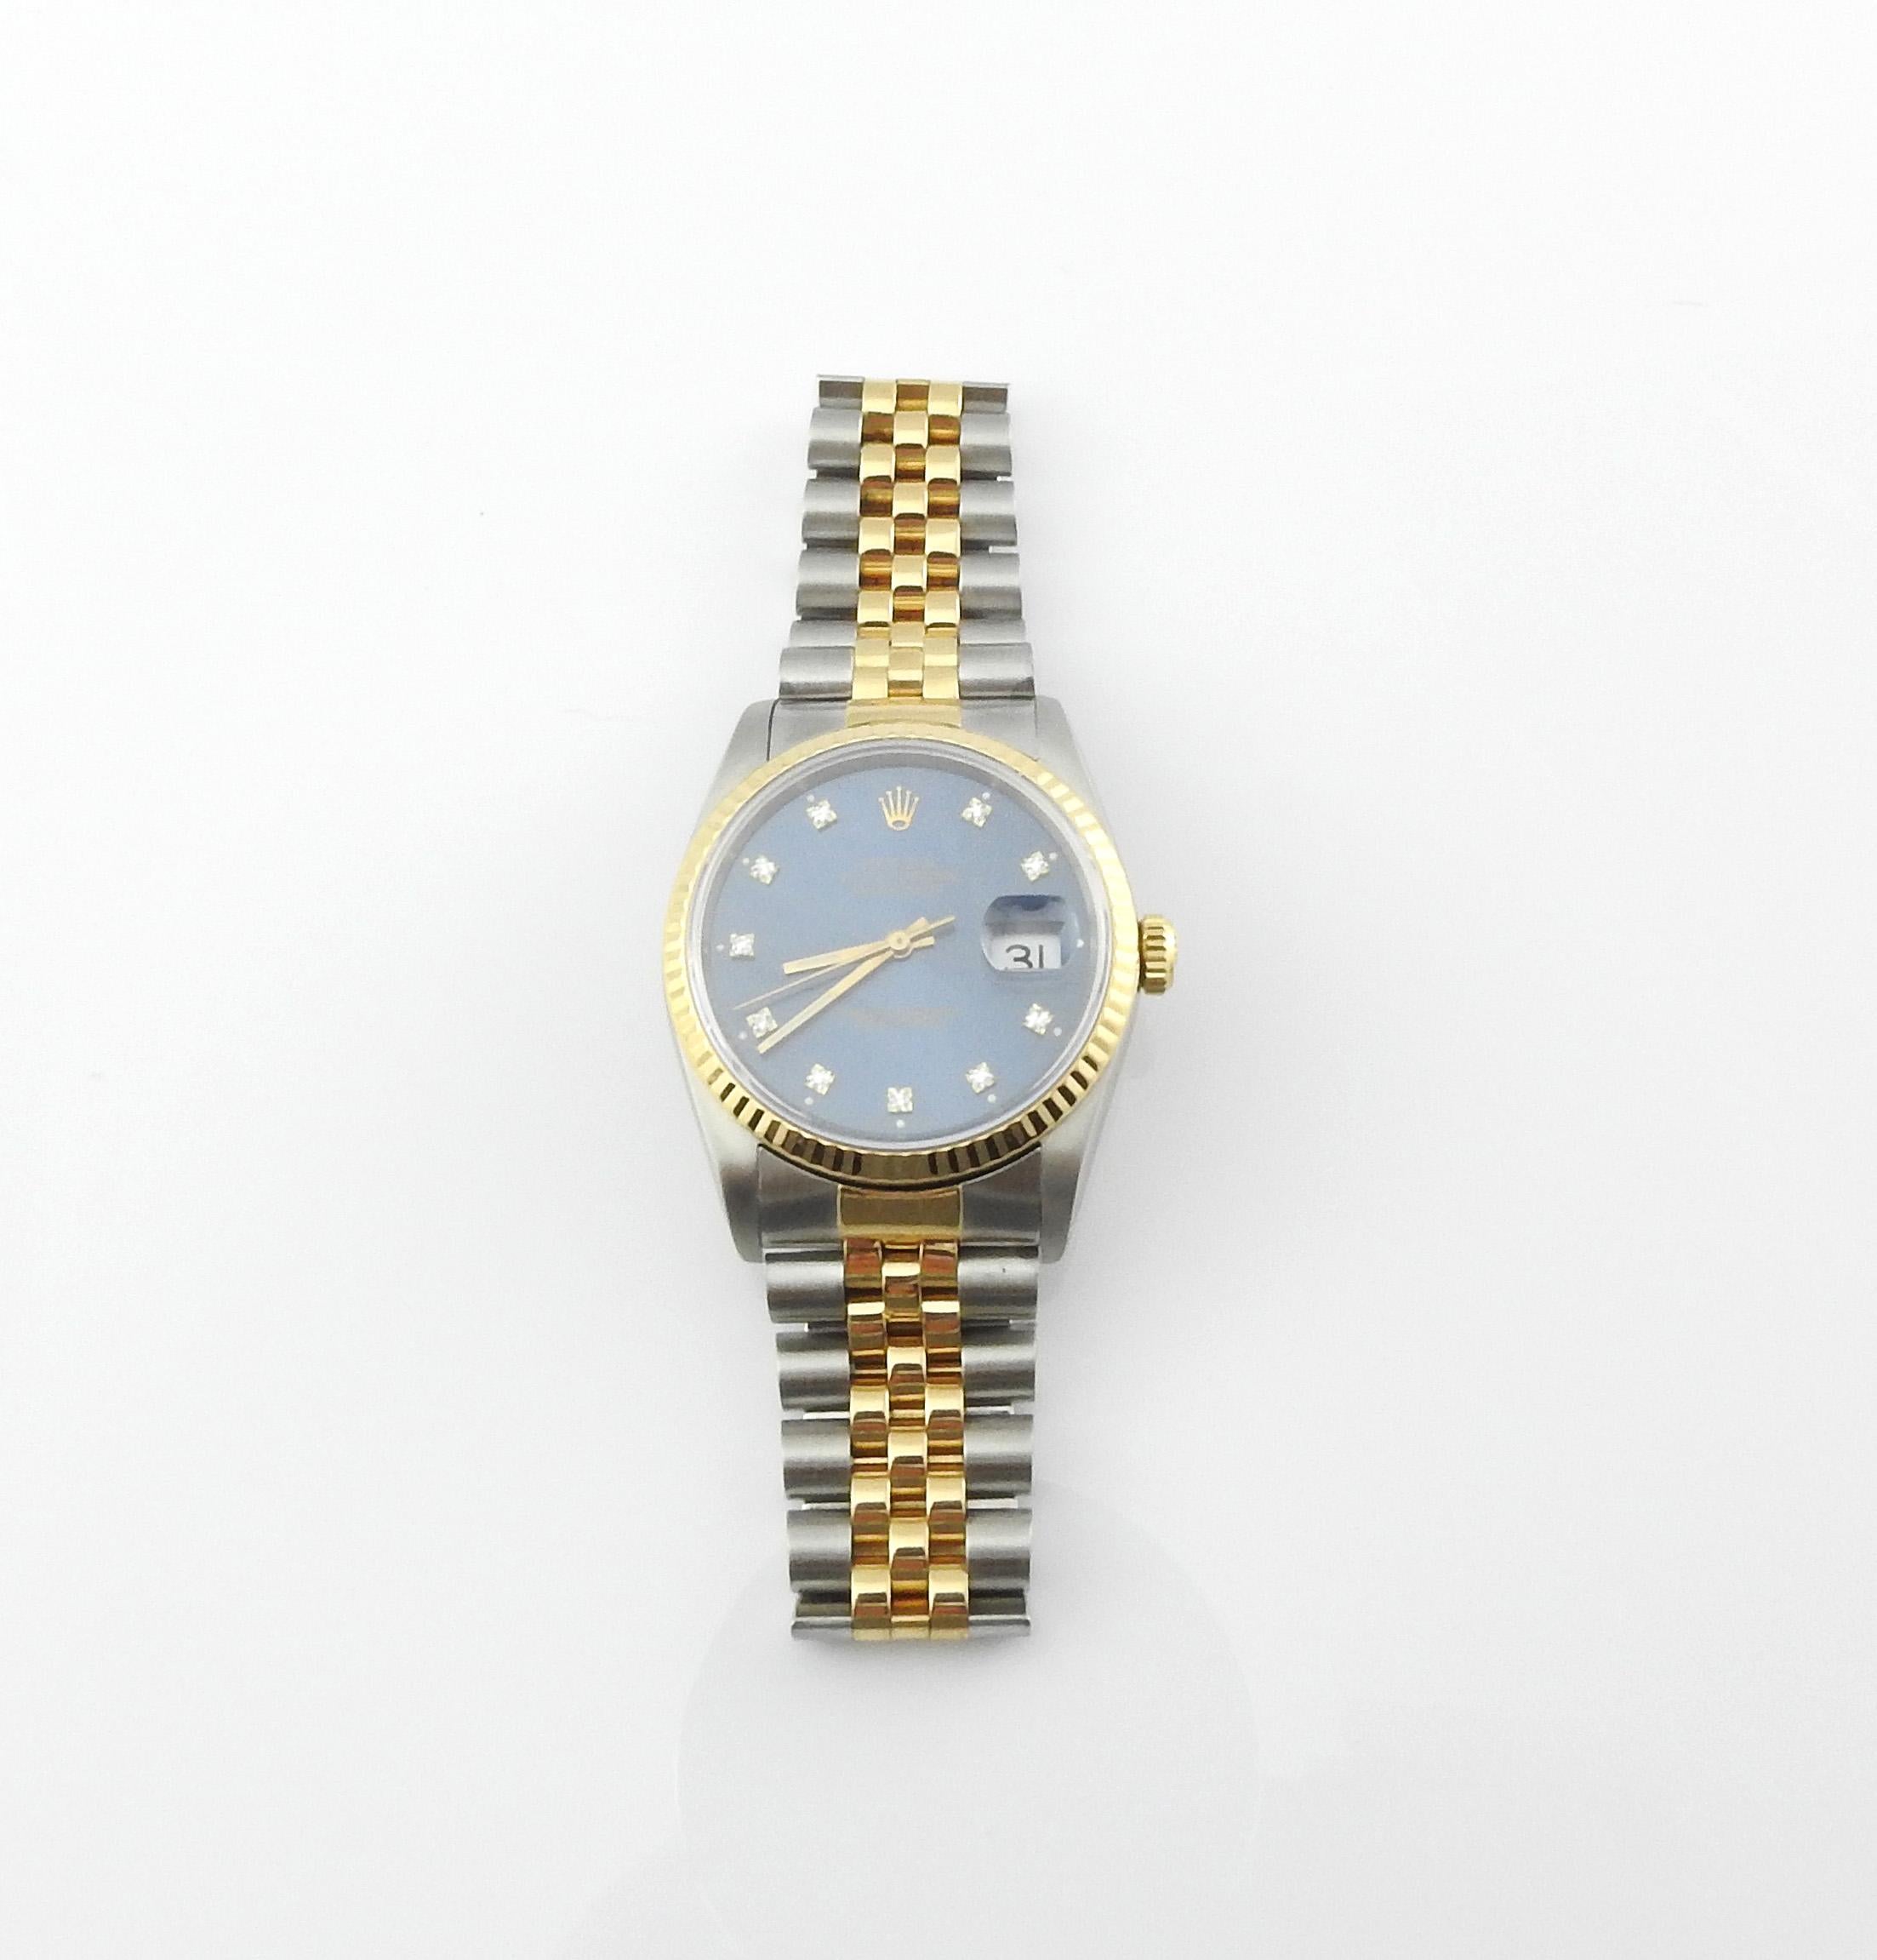 1989 Rolex Men's Watch

Model: 16233
Serial: L659017

Two tone watch - 18K yellow gold and stainless steel

Fits up to 7 3/4